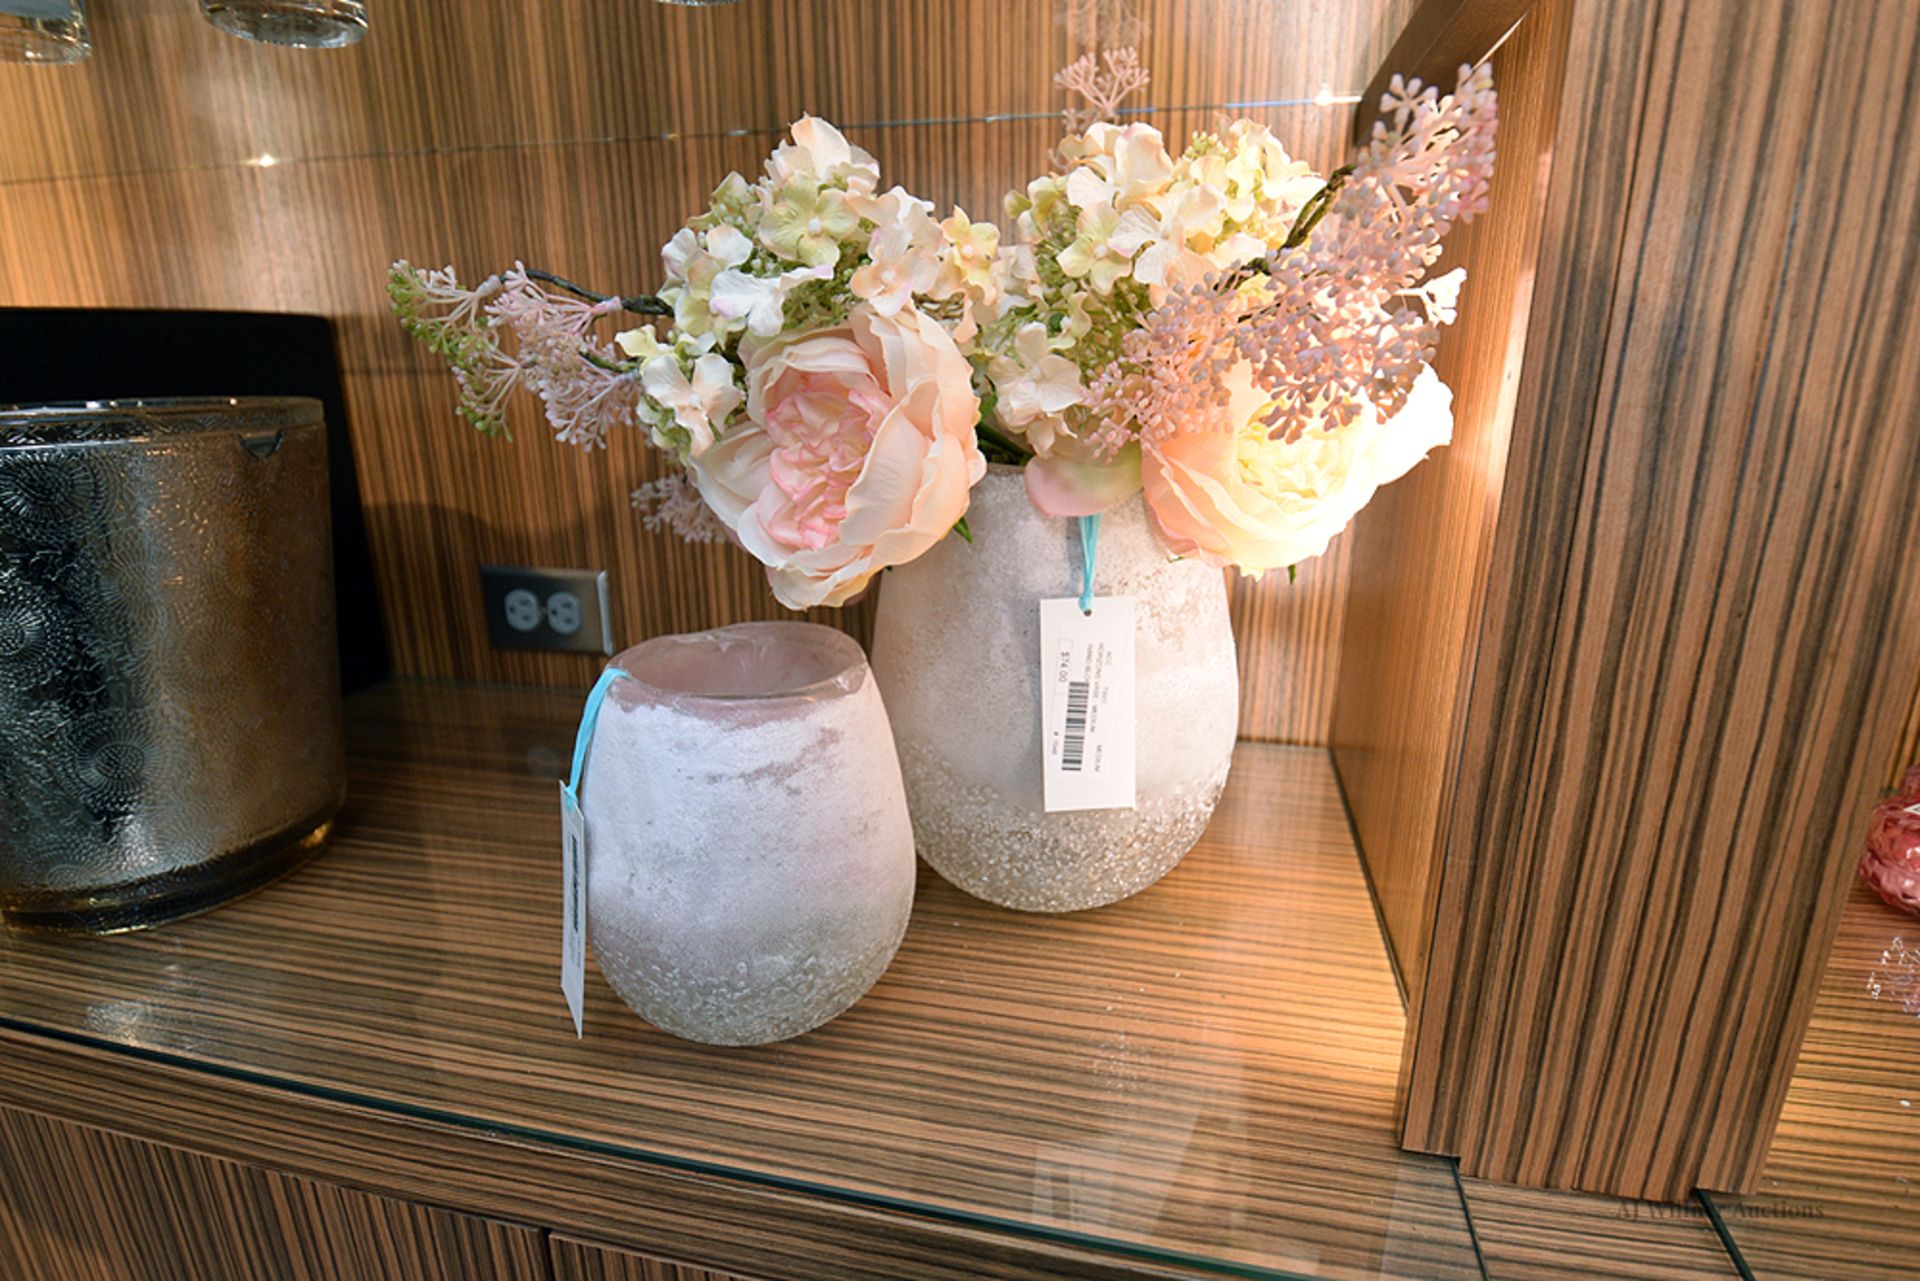 Set of Hand Blown Glass Jars w/ Florals - Image 2 of 2